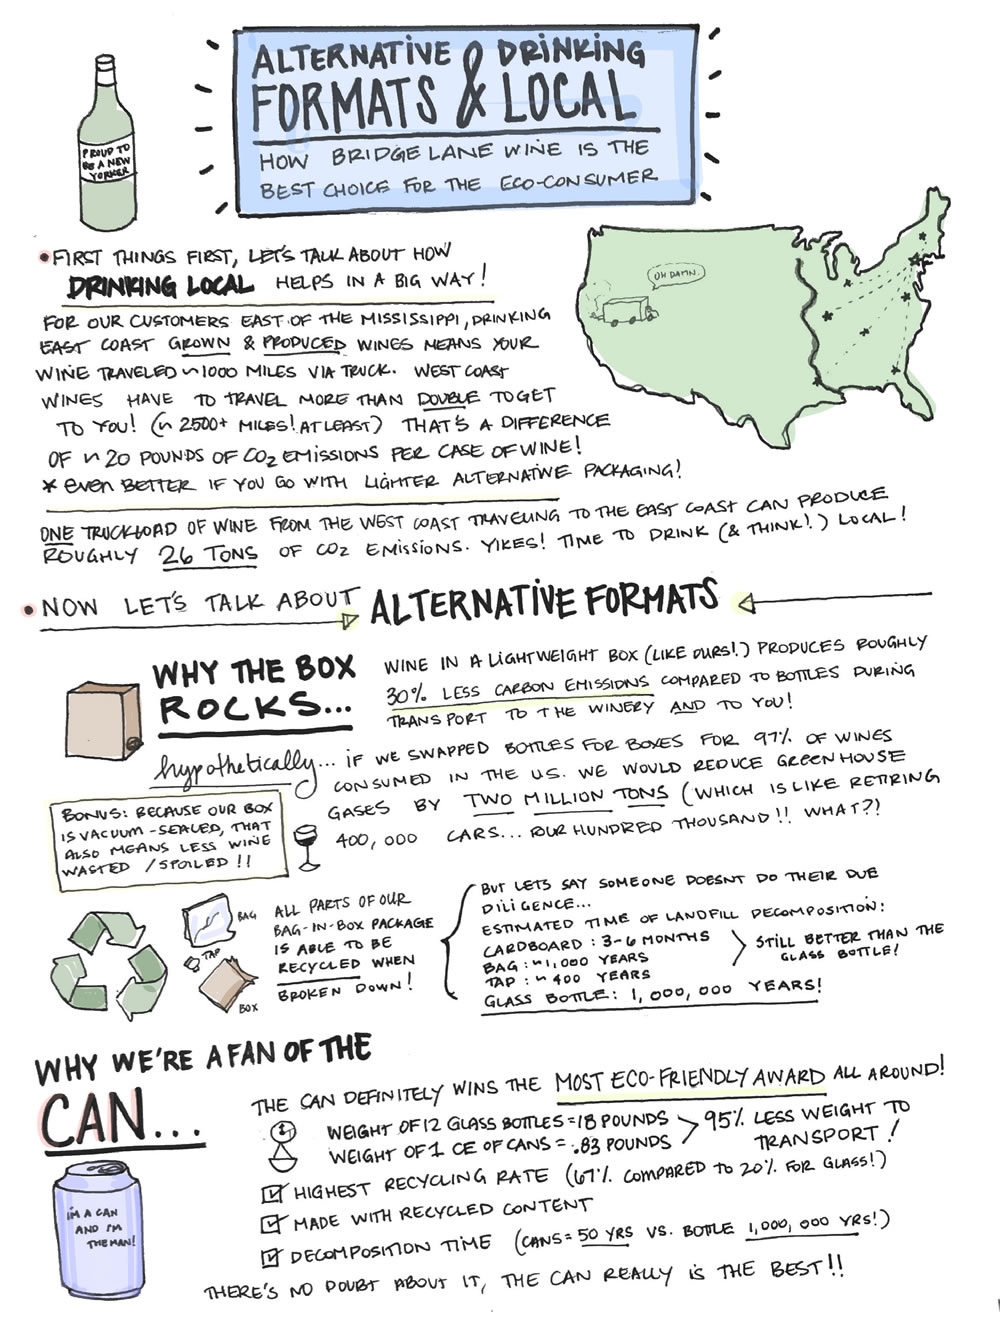 Wine, Illustrated: Alt Formats & Drinking Local For the Eco-Consumer